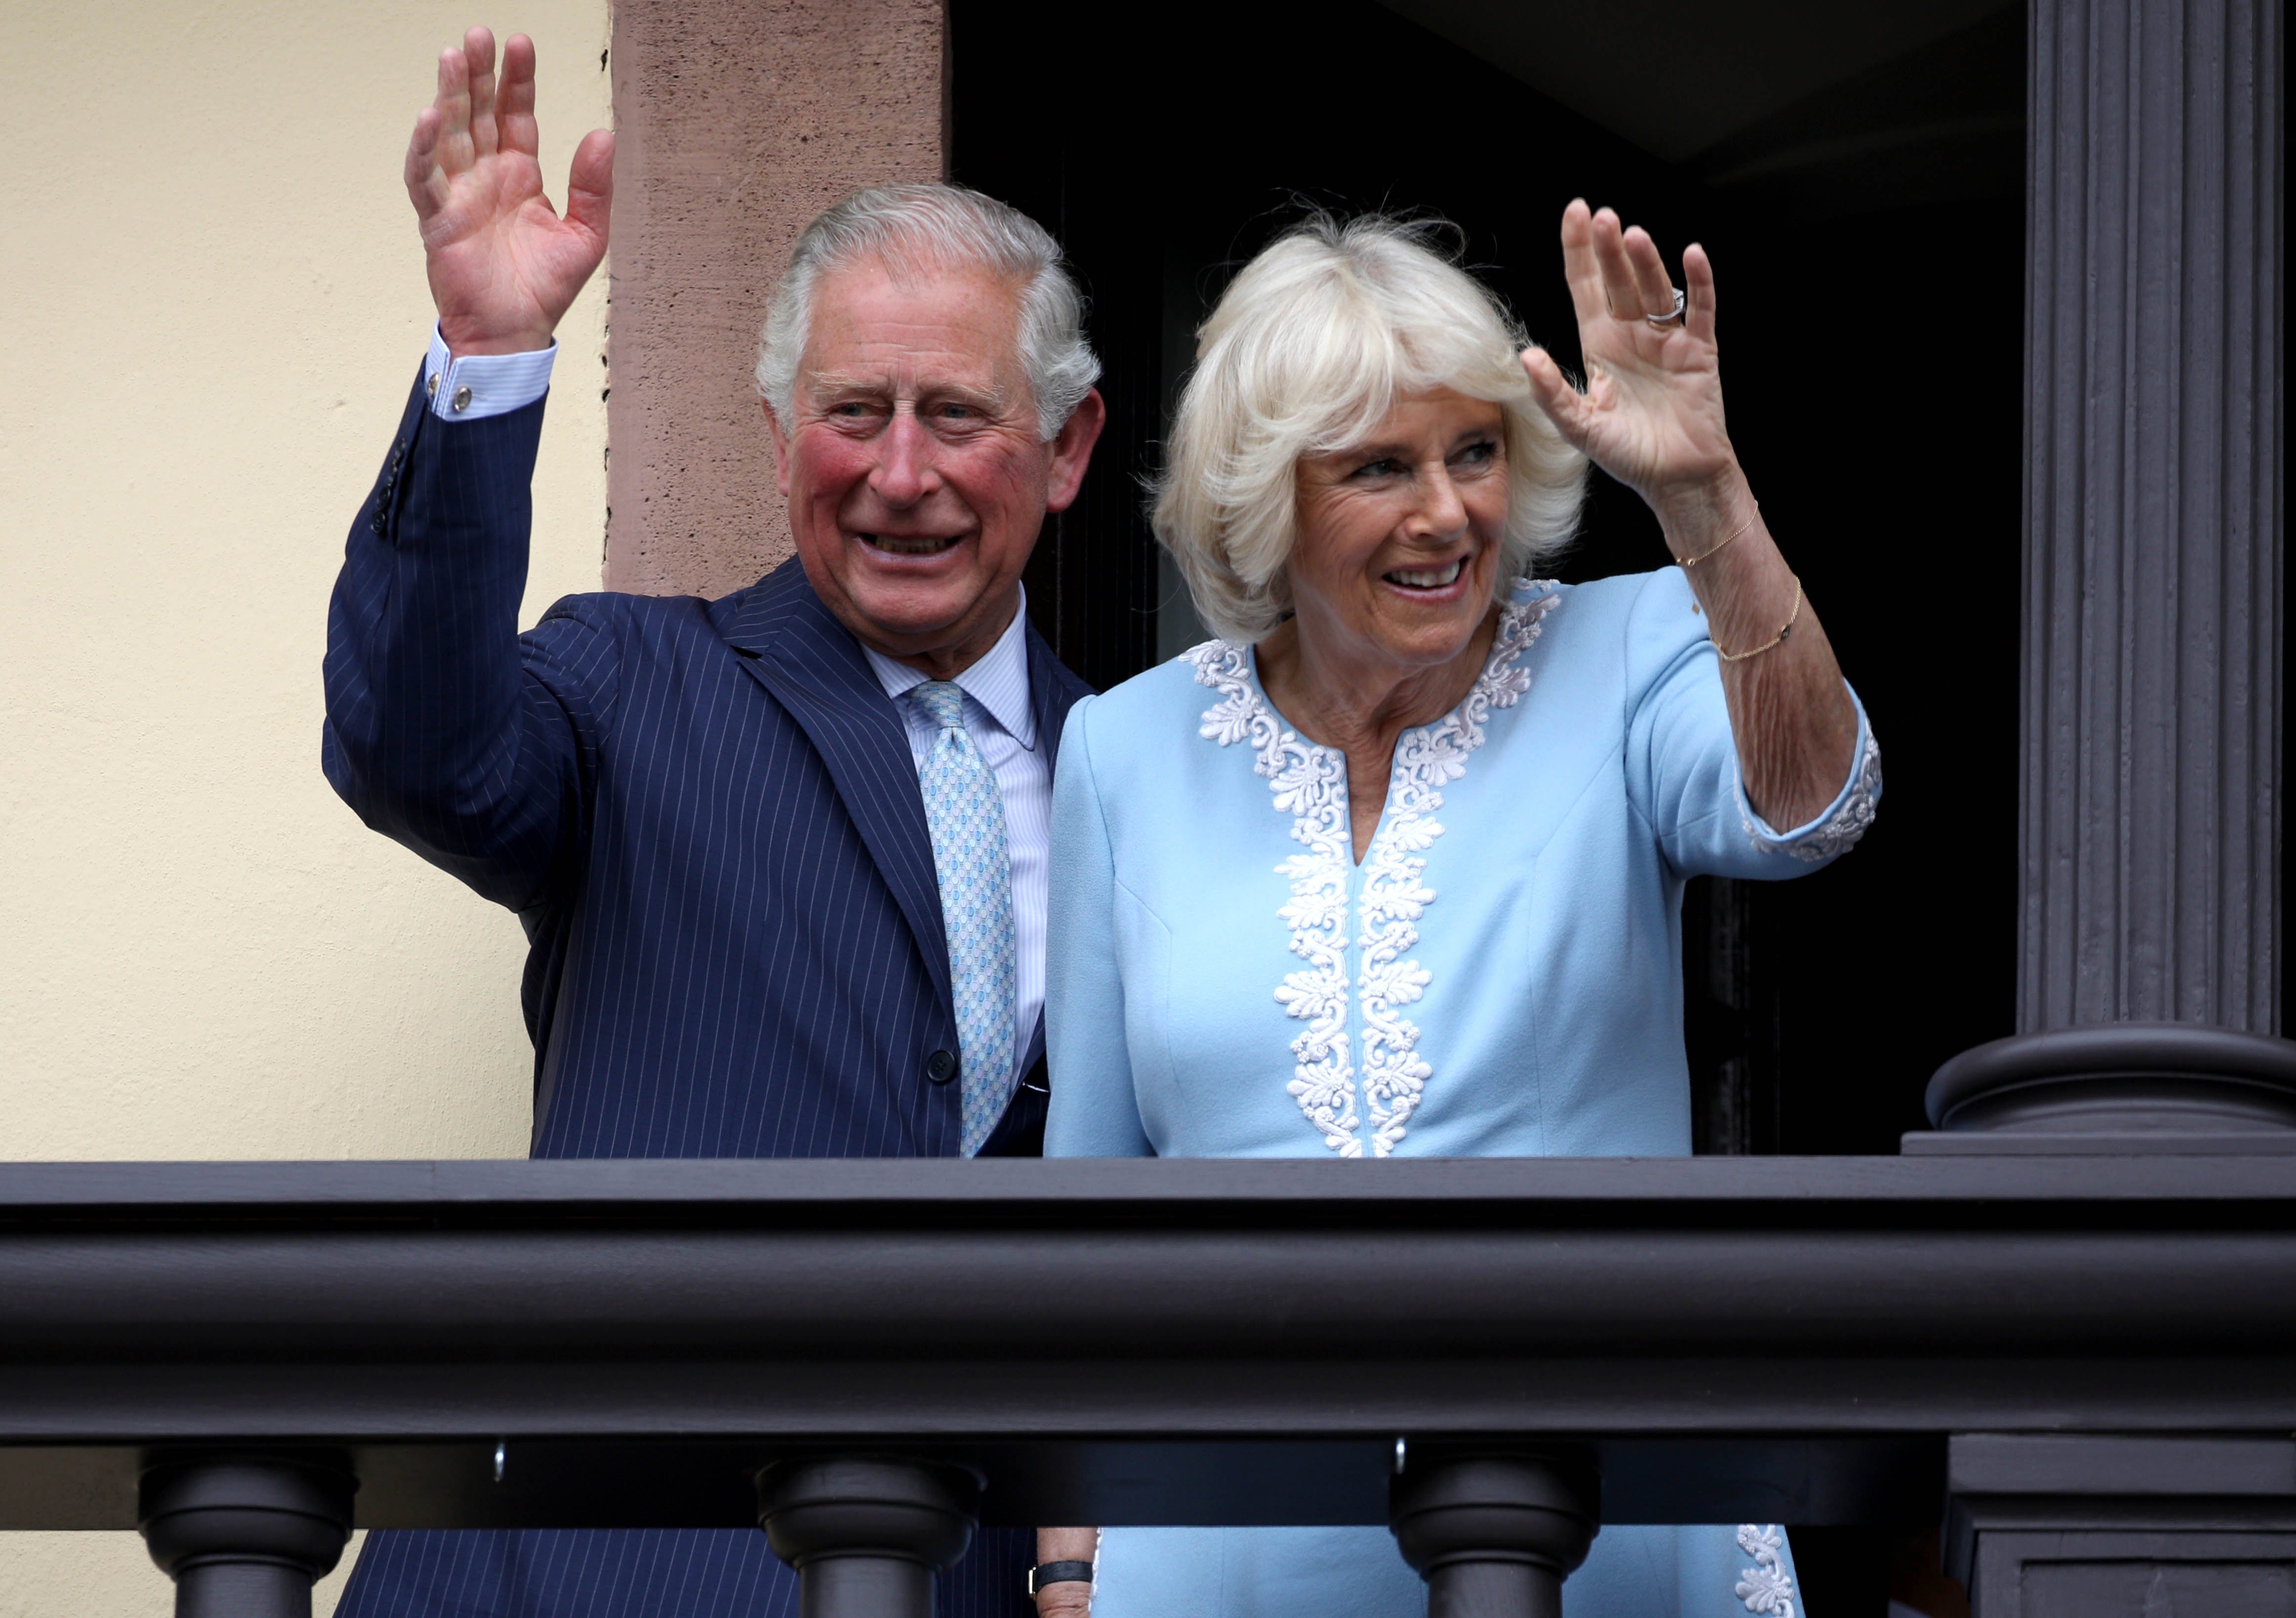 Prince Charles and Camilla Parker Bowles wave to the crowd from the balcony at Old City Hall